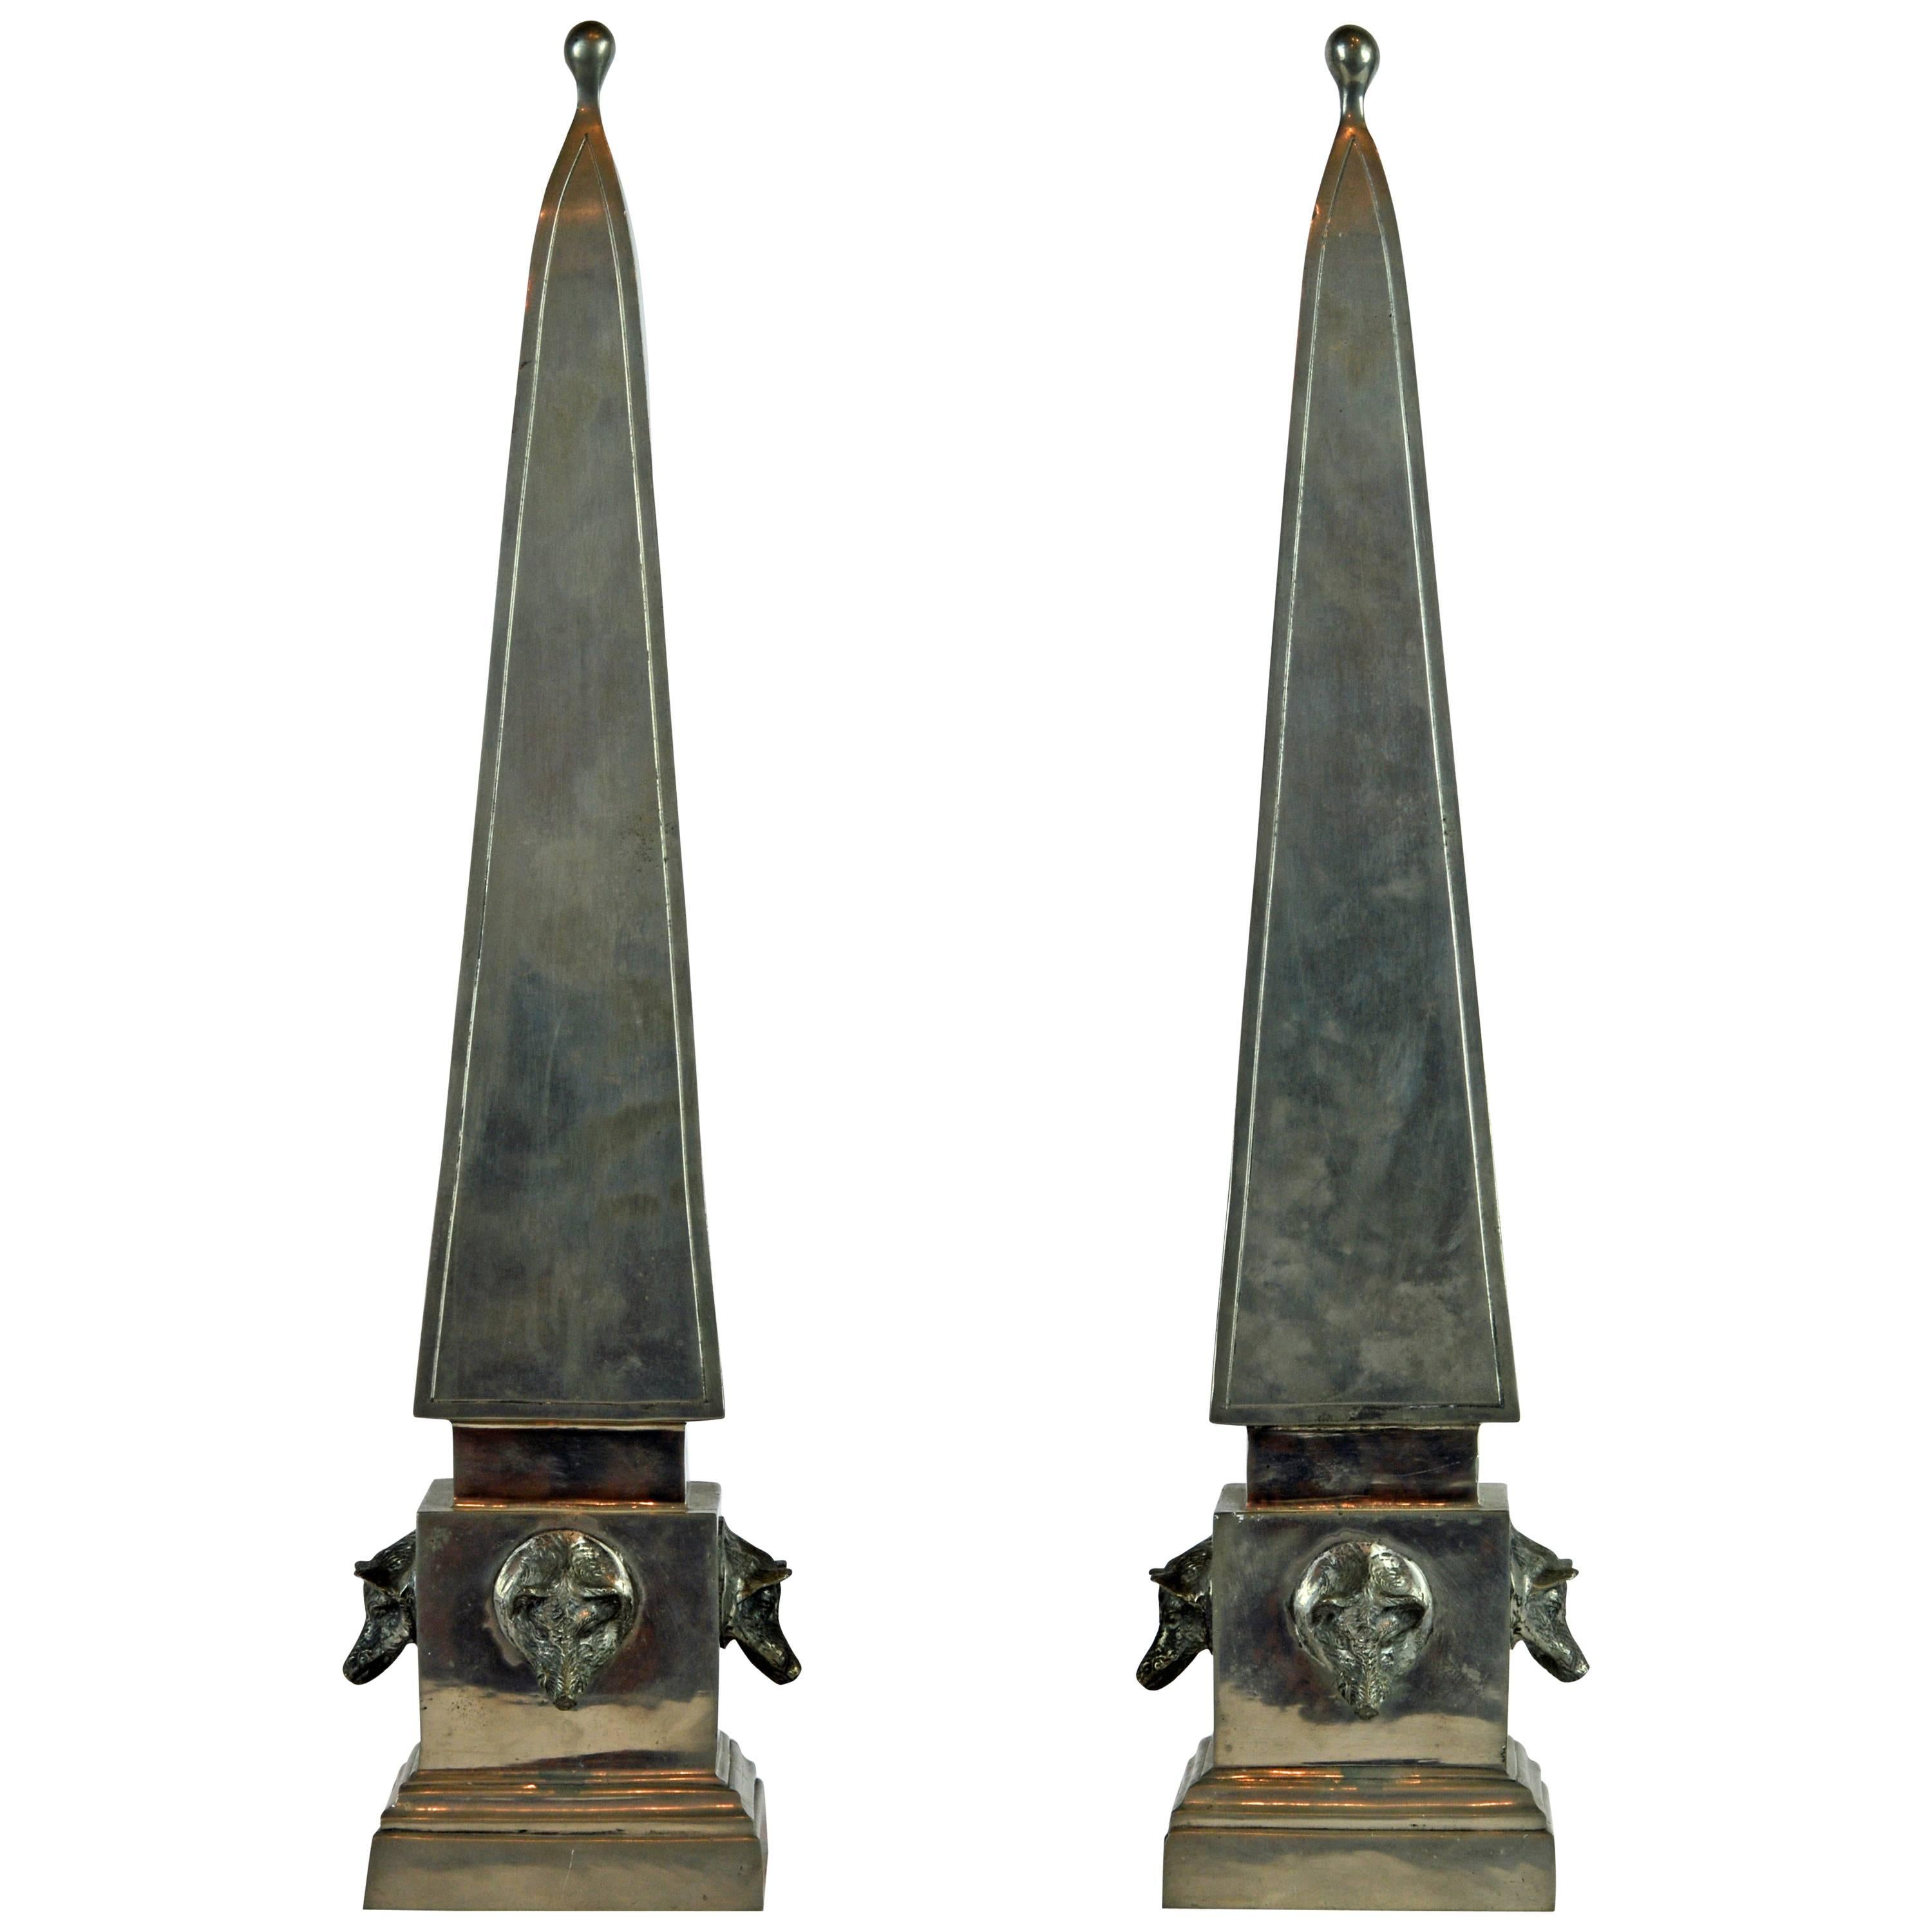 Pair of Large Mid Century Portuguese Pewter Obelisk Models with Boar's Heads